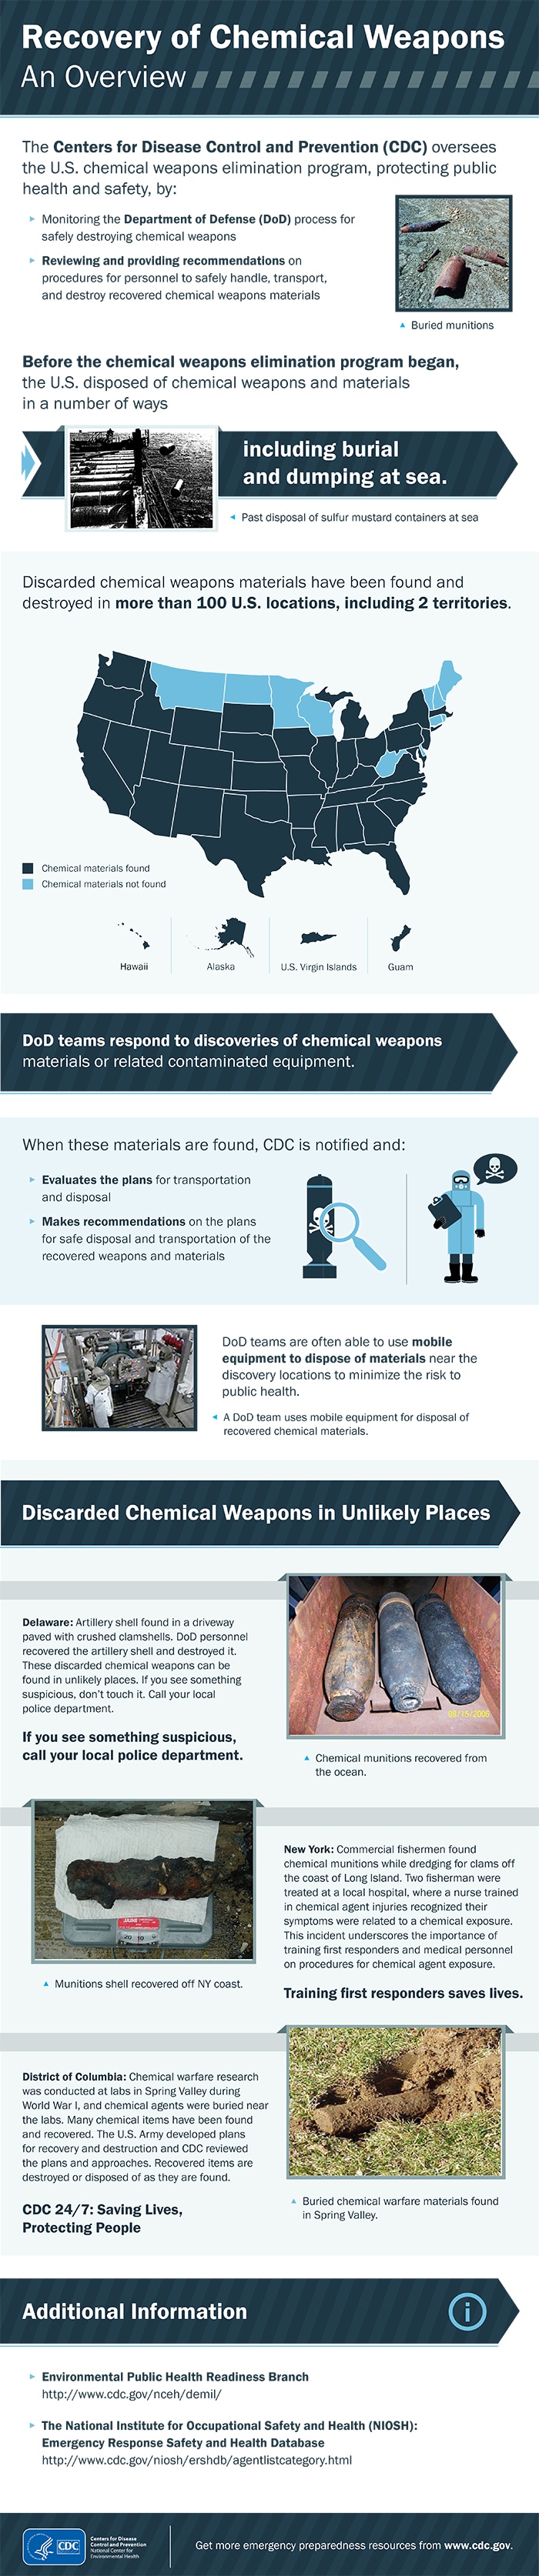 Infographic: Recovery of Chemical Weapons: An Overview